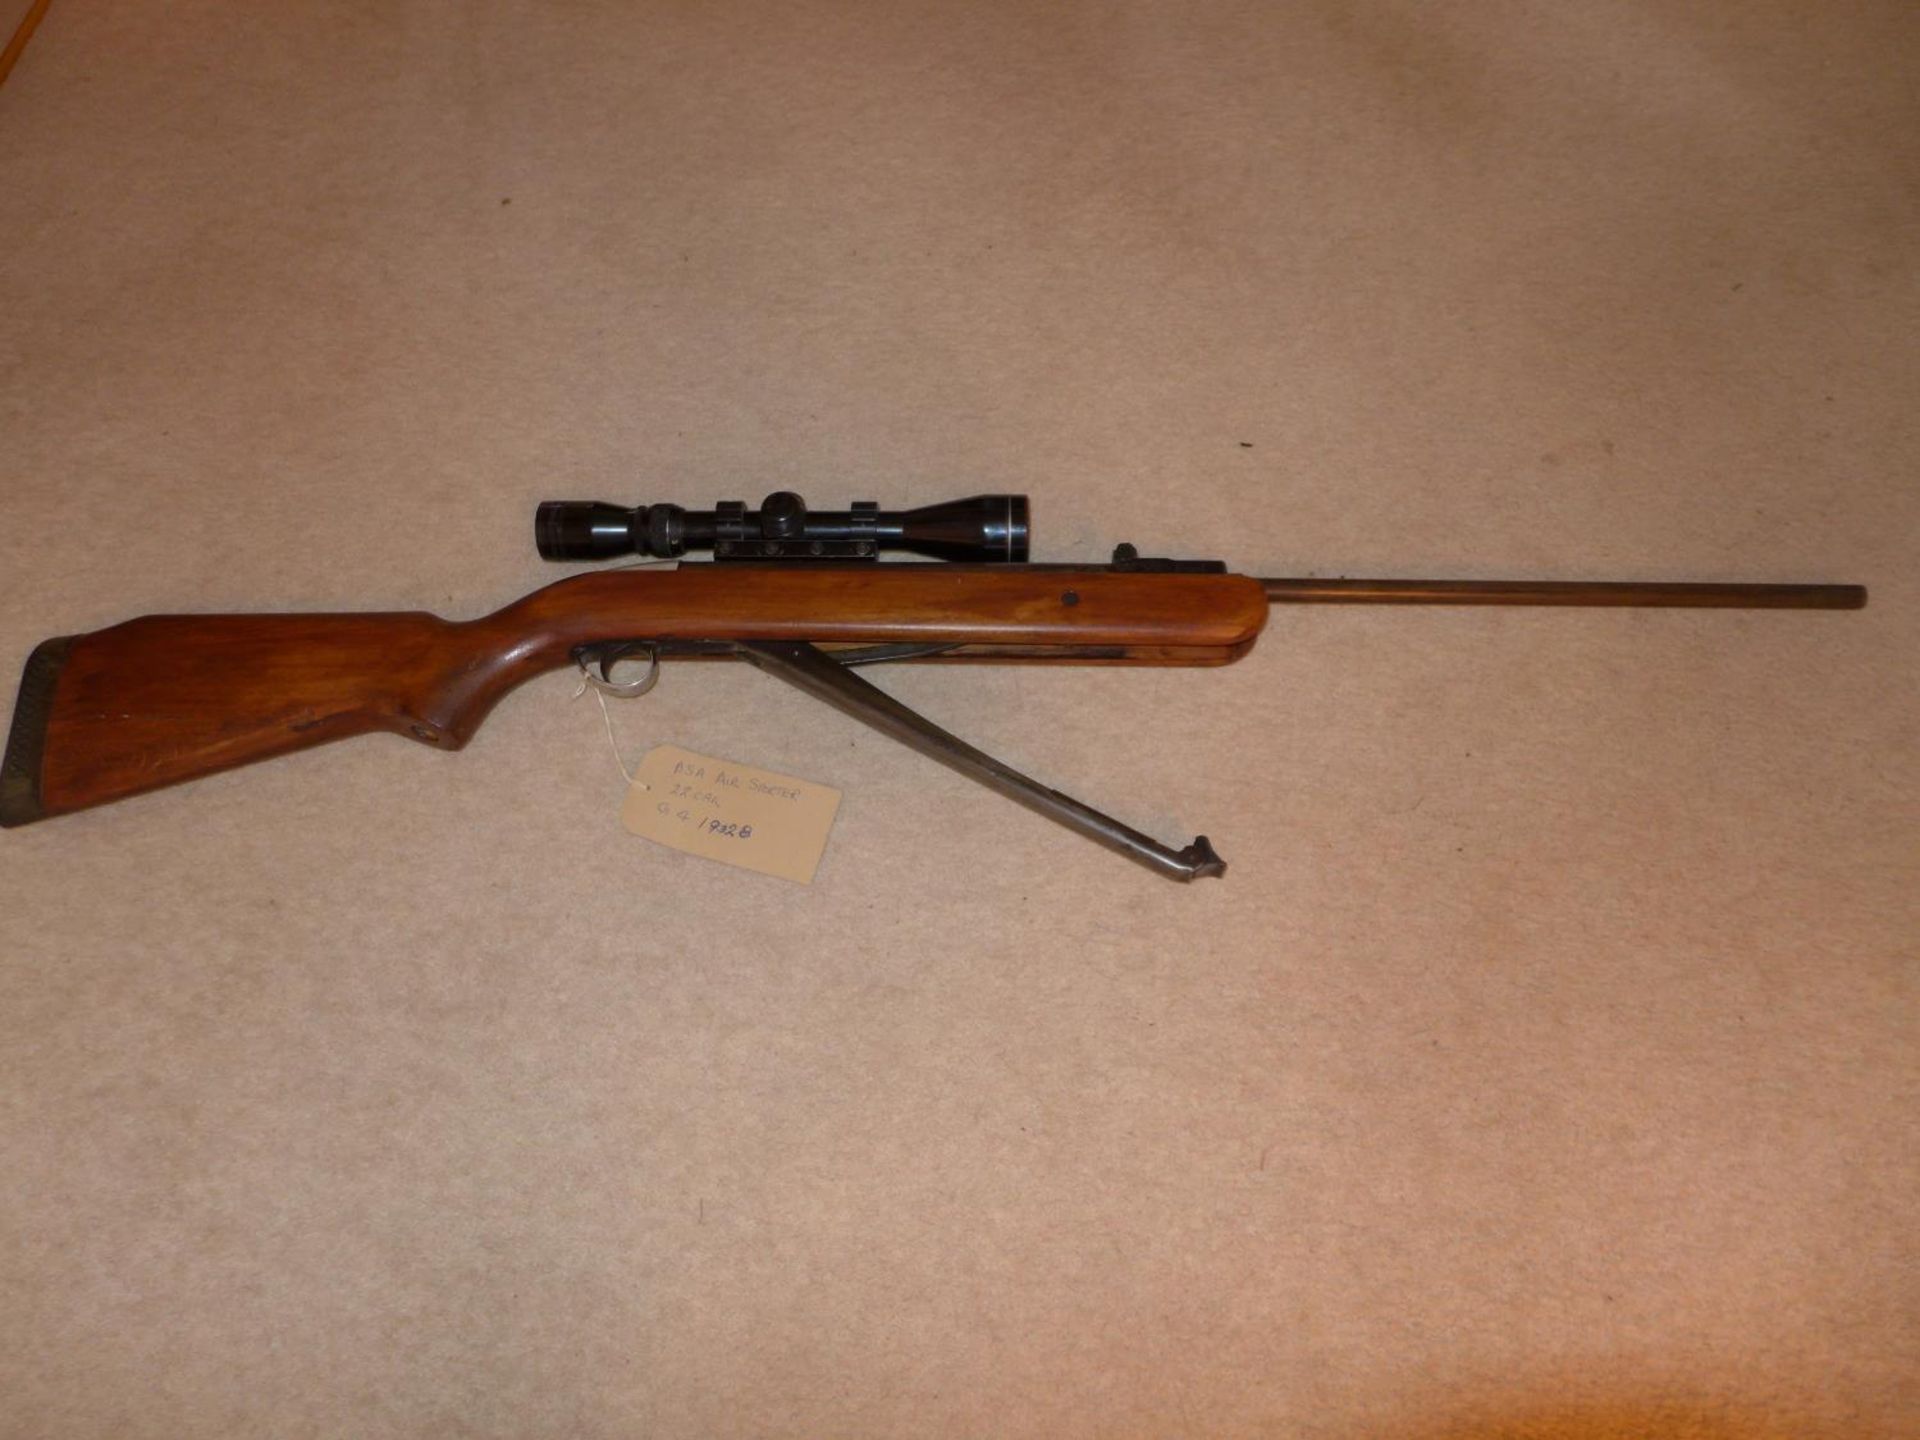 A B.S.A. .22 CALIBRE AIR SPORTER AIR RIFLE, 46CM BARREL, FITTED TASCO PRONGHORN TELESCOPIC SIGHTS - Image 4 of 4